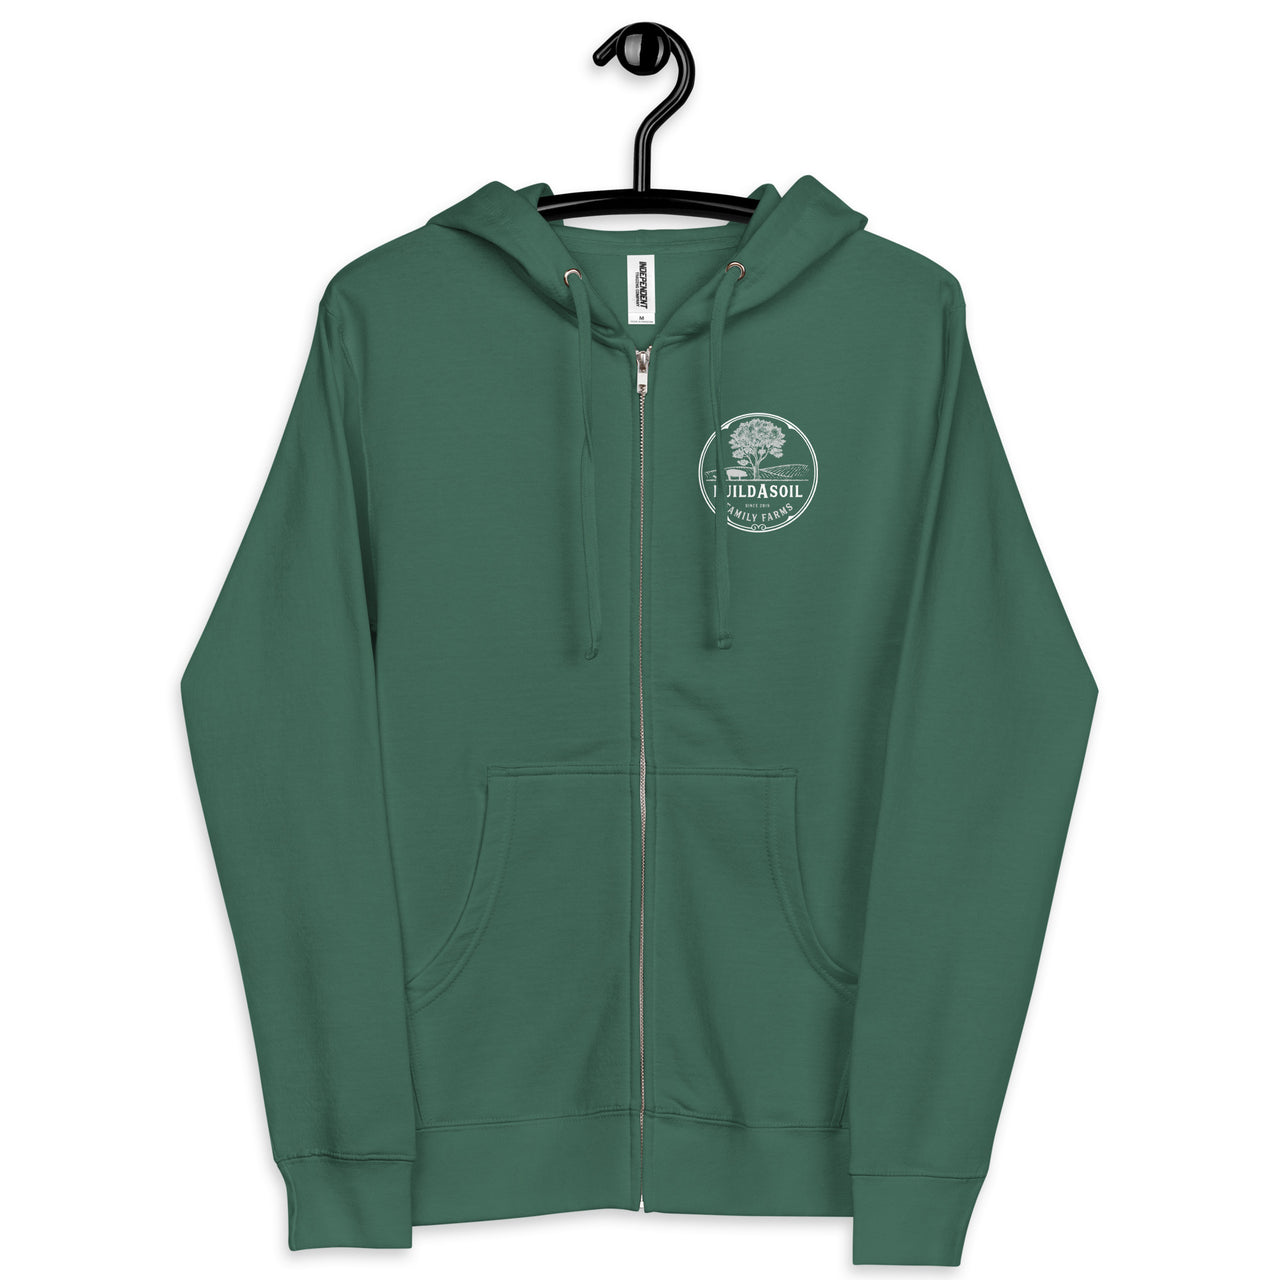 BuildASoil Family Farms Front - Loyal To The Soil Back Zip Up Hoodie